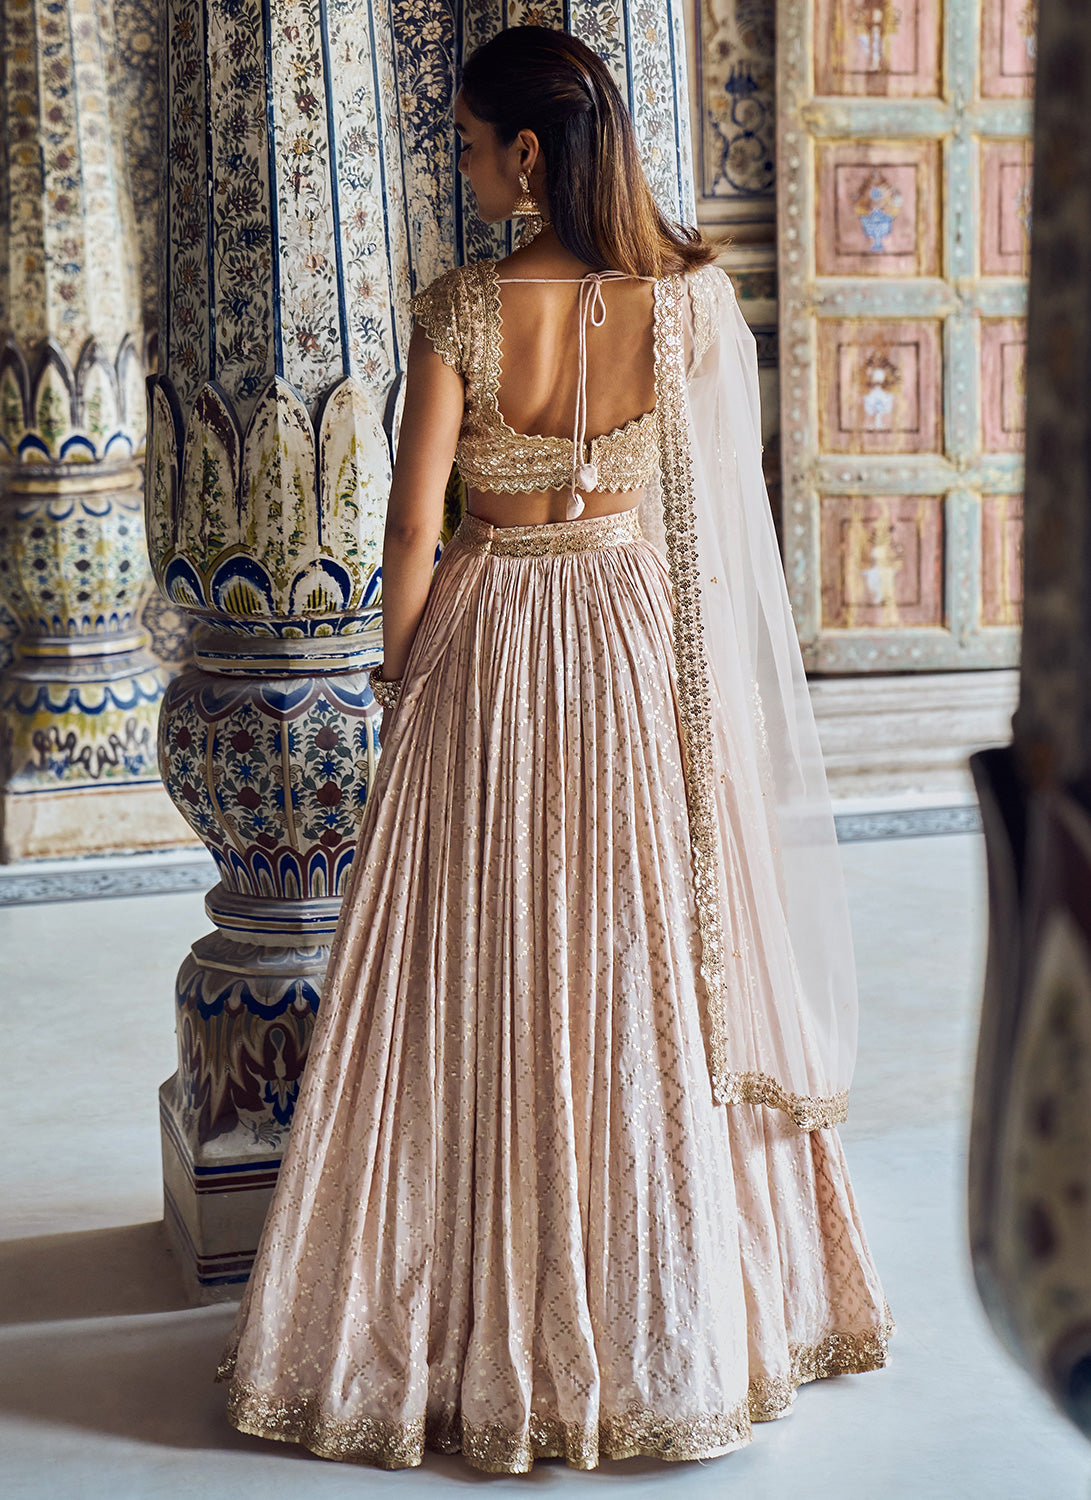 Looking for a gold wedding lehenga? Here's your moodboard | Vogue India